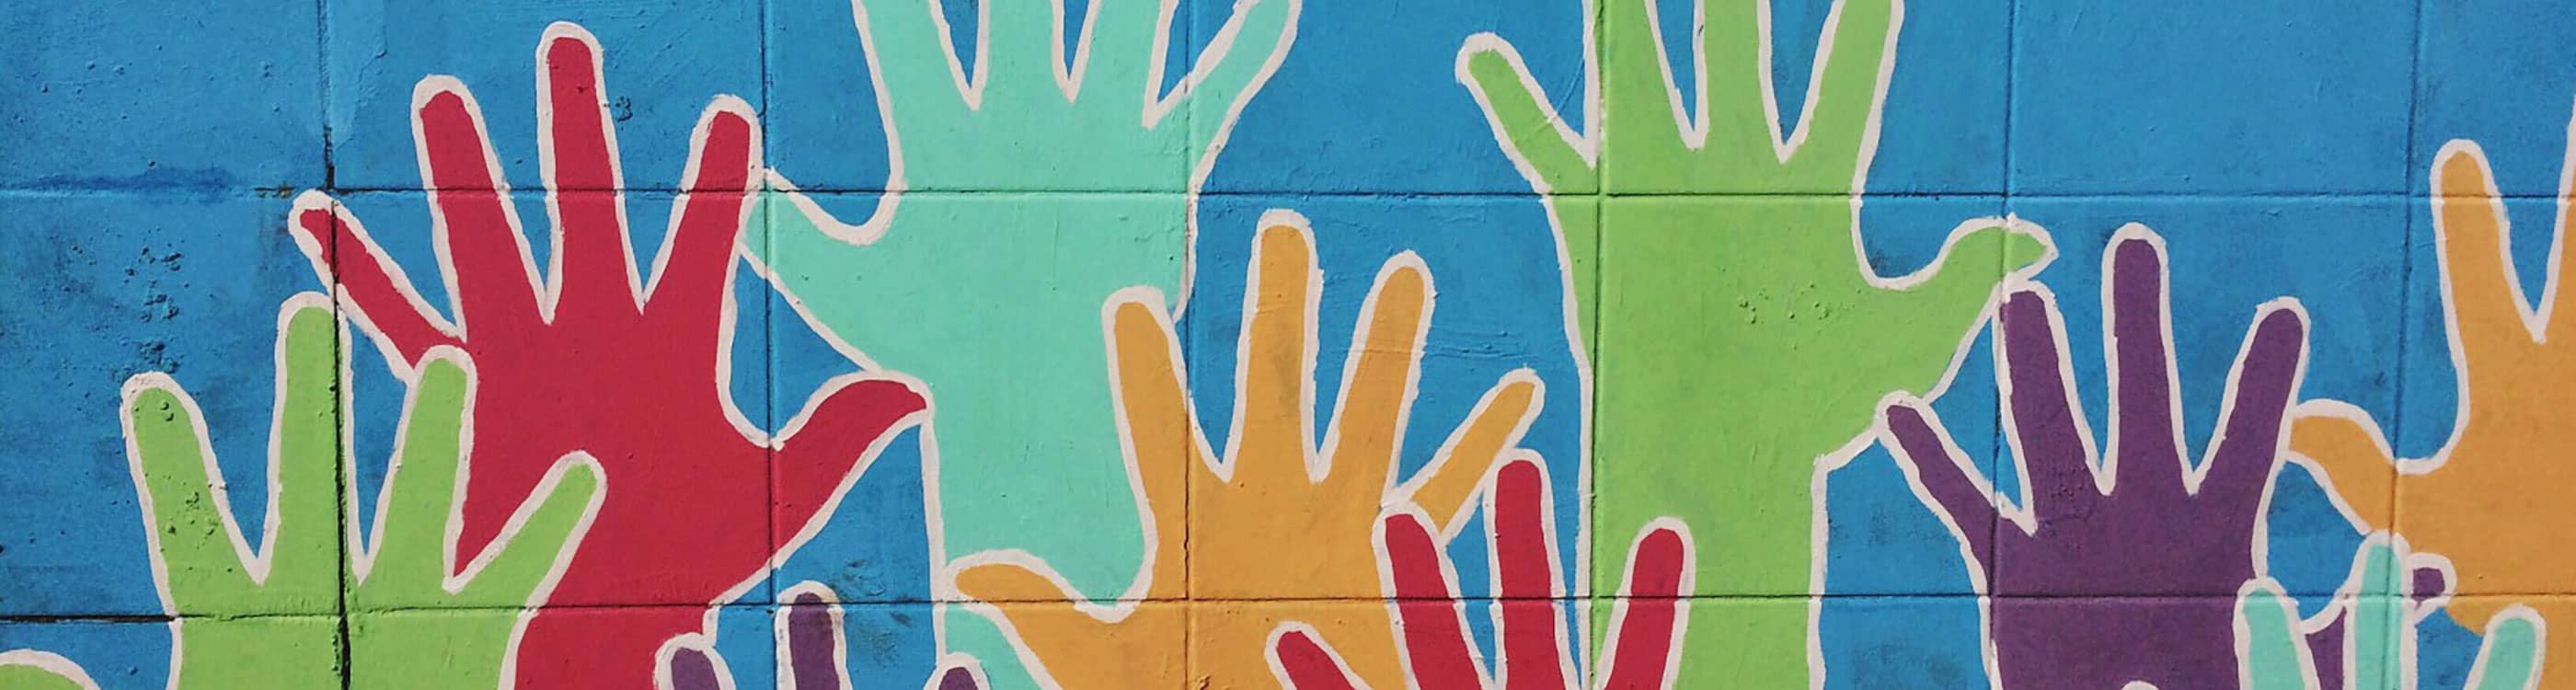 Mural of multi-colored hands raised